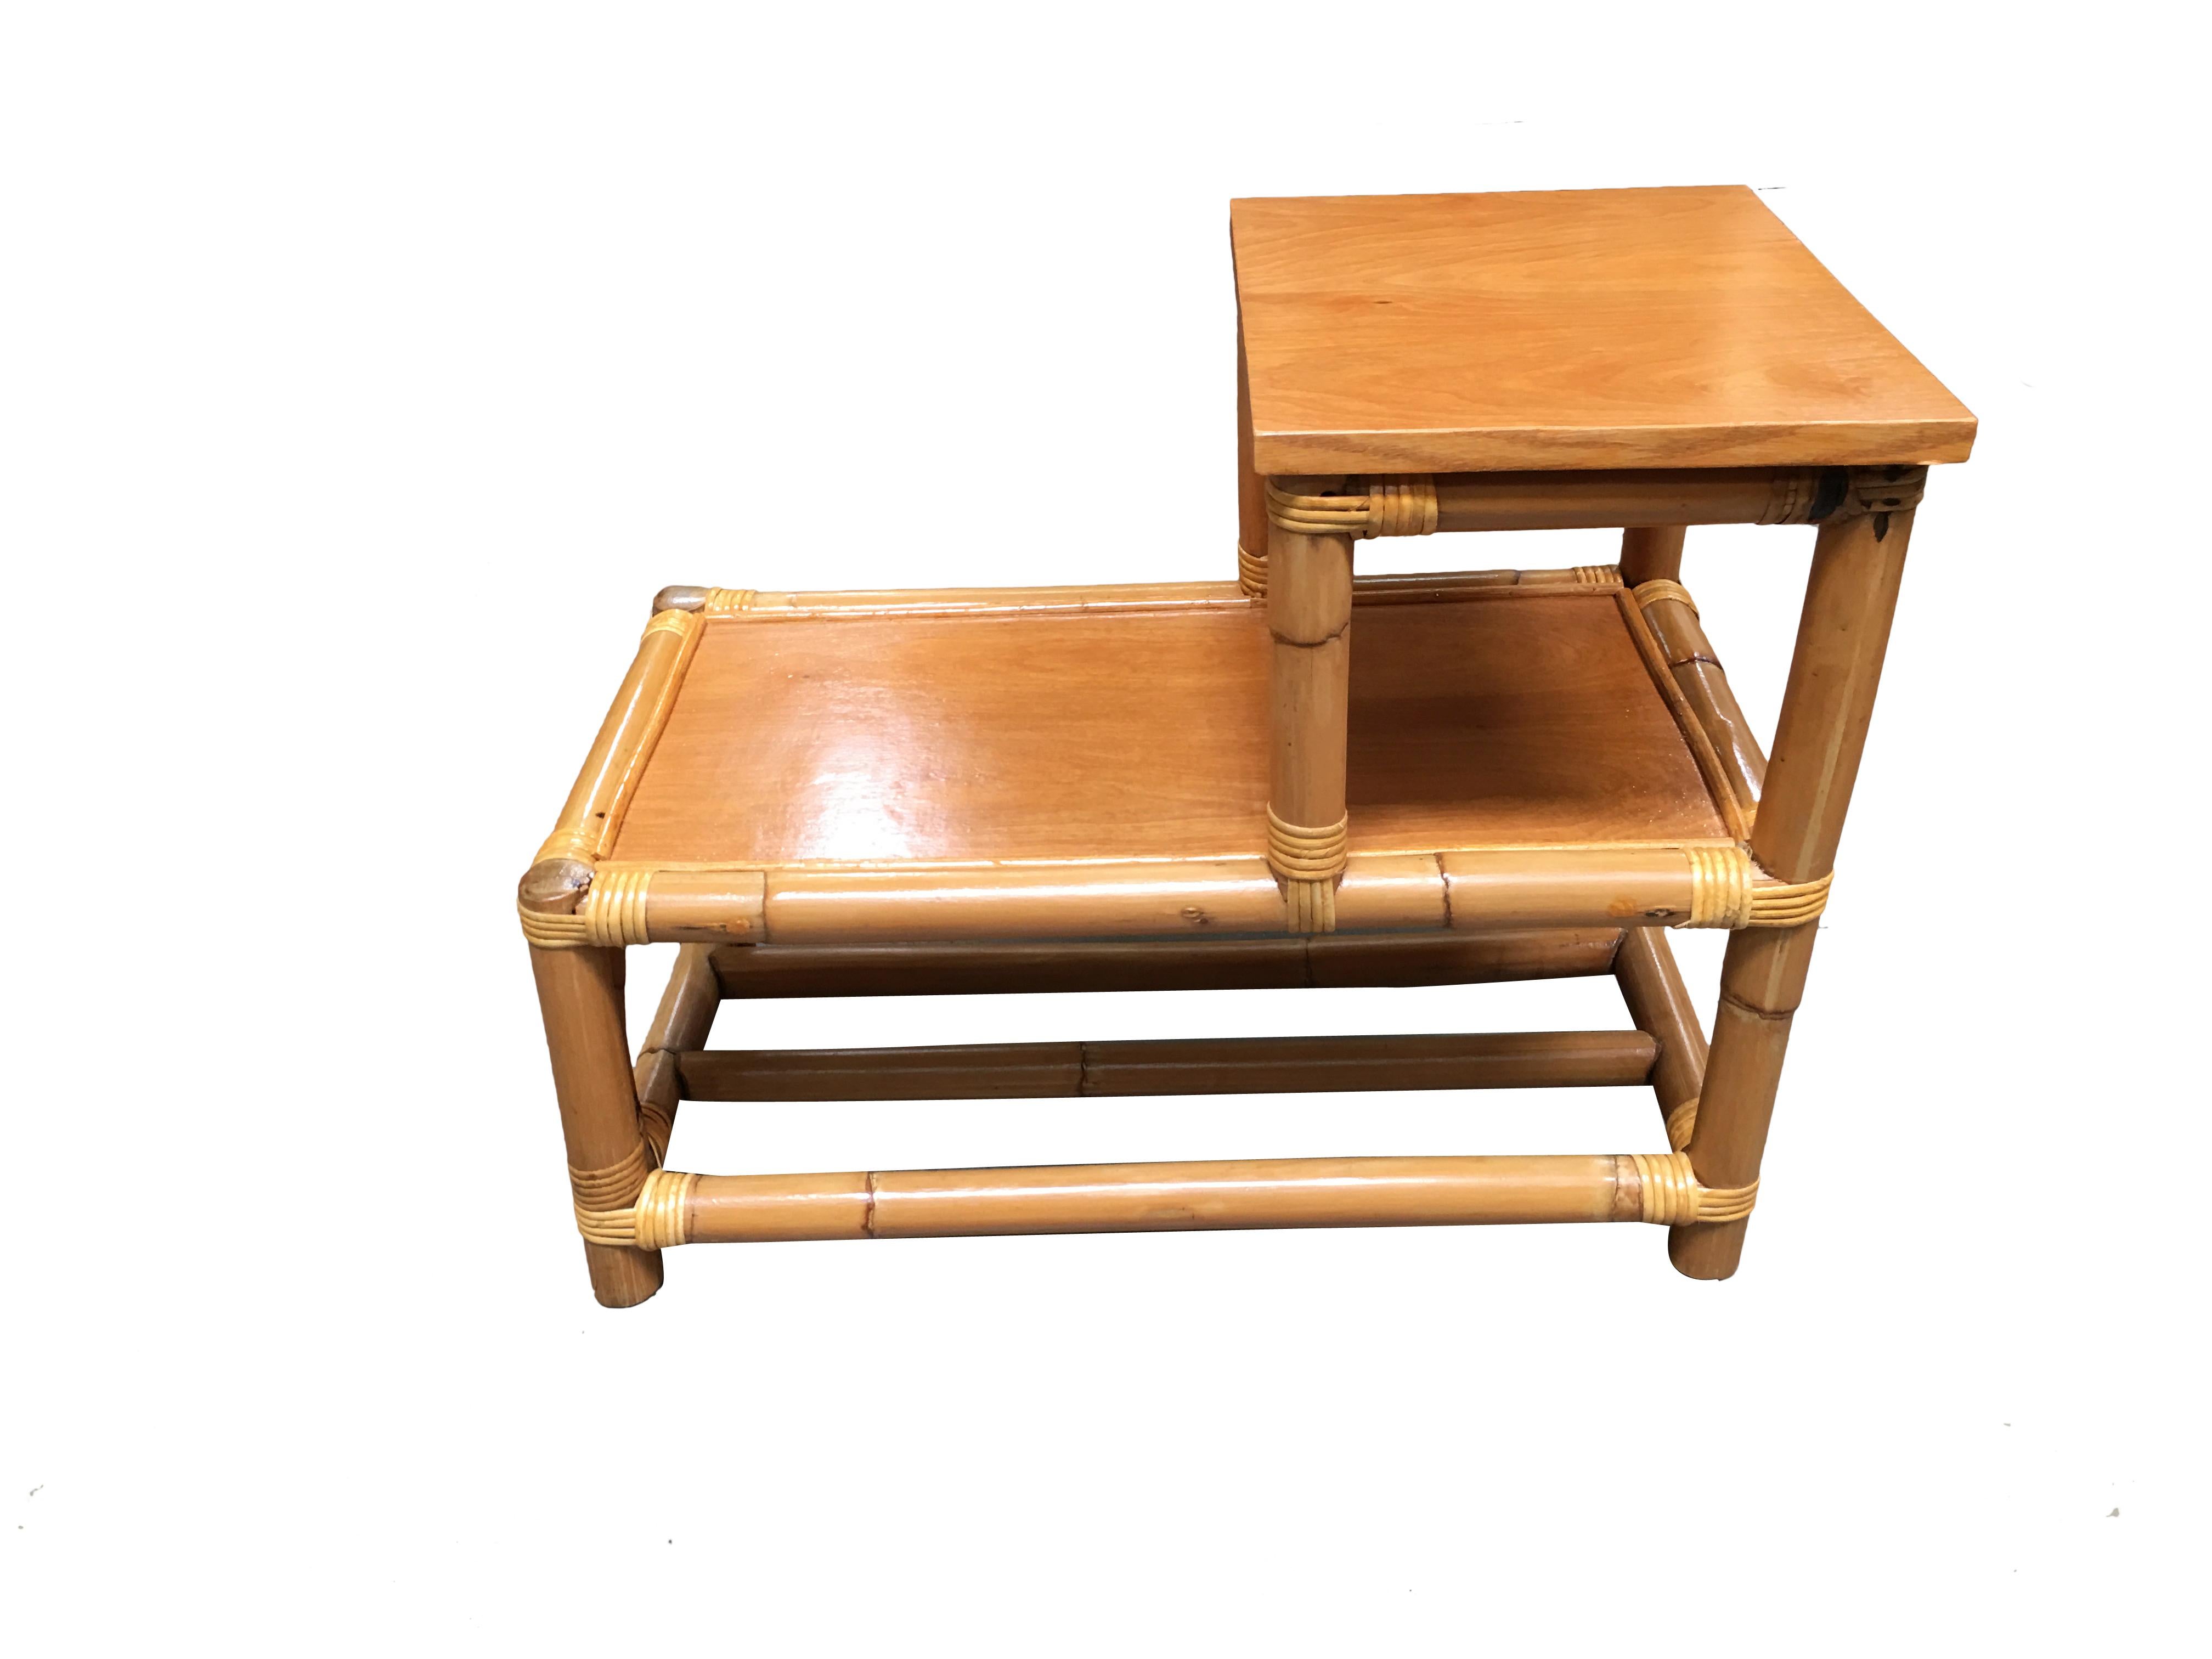 Stick leg rattan side table with two-tier wood tops, circa 1950. Designed in the manner of Paul Frankl. 
We only purchase and sell only the best and finest rattan furniture made by the best and most well-known American designers and manufacturers